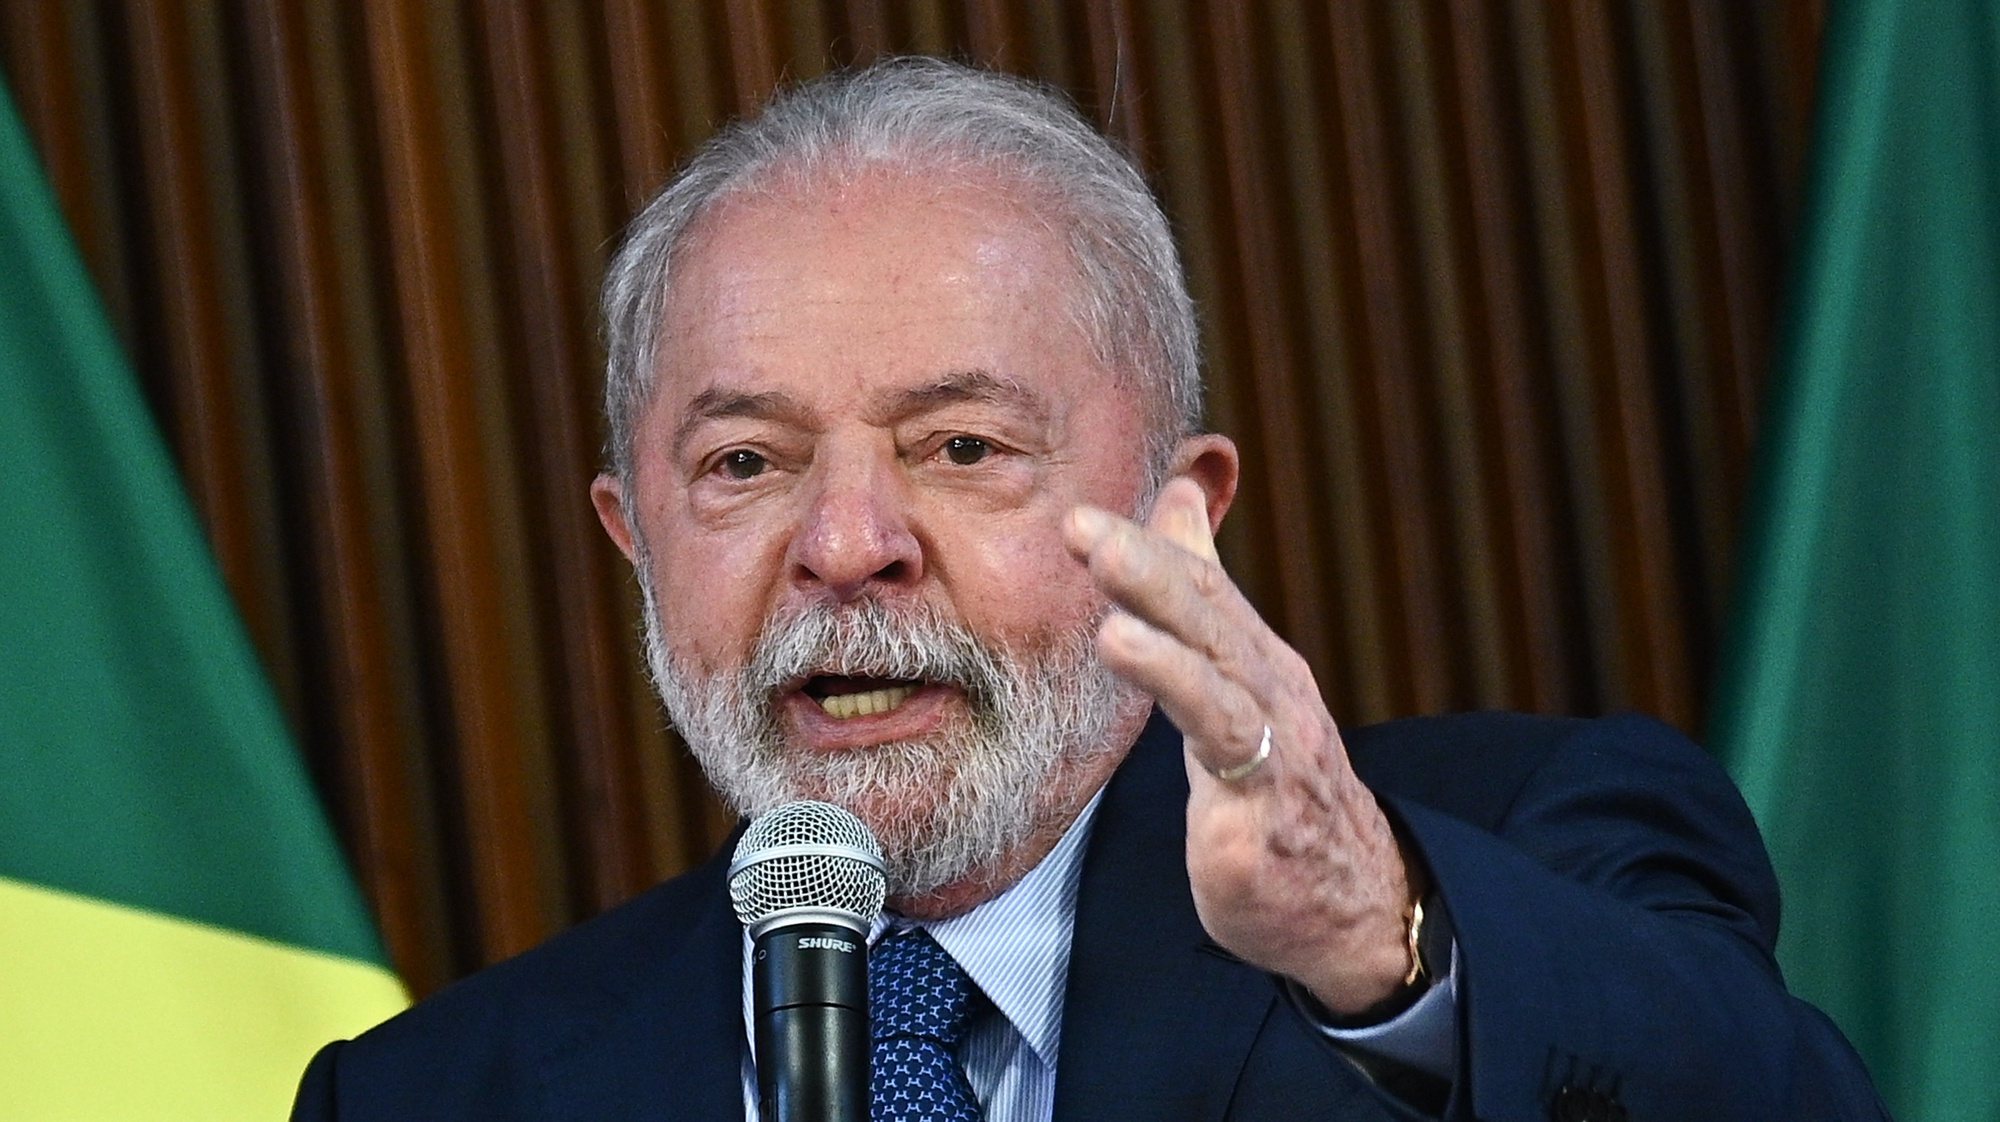 epa10434045 The President of Brazil, Luiz Inacio Lula da Silva, speaks during a meeting with governors at the Planalto Palace, in Brasilia, Brazil, 27 January 2023.  EPA/Andre Borges